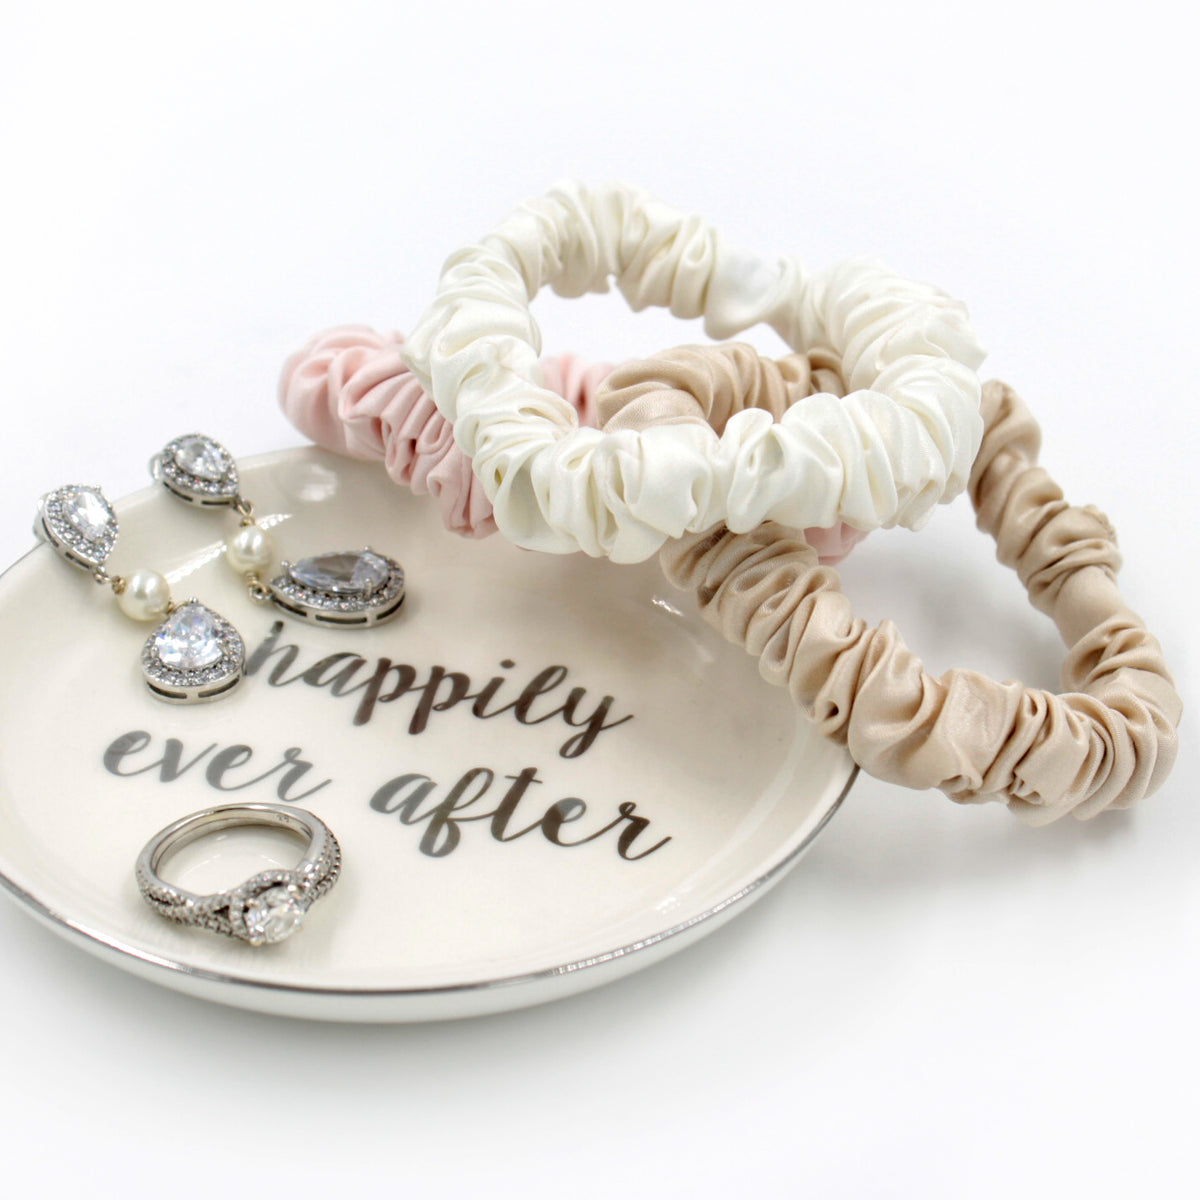 Mulberry Park Silks Doorbuster: Small Scrunchie Set - Ivory, Pink, Sand Skinny with Jewerly